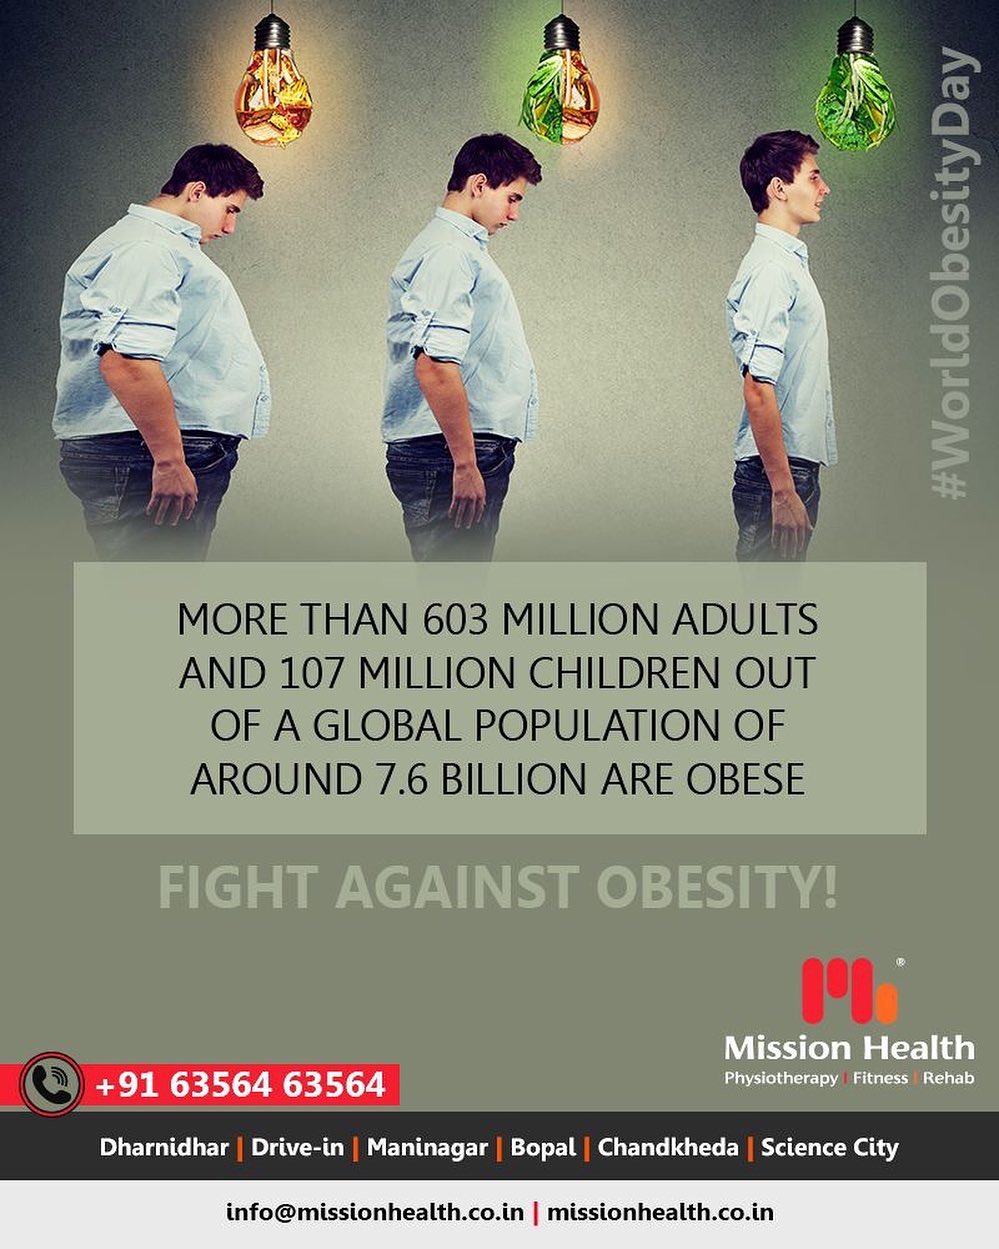 There is a clear obesity problem, with the weight increasing at four times the global average. It has become important to take action immediately and improve population health! 
#FightAgainstObesity #MissionHealth #MissionHealthIndia #fitnessgoals #MovementIsLife #PersonalTraining #weightmanagement #fitness